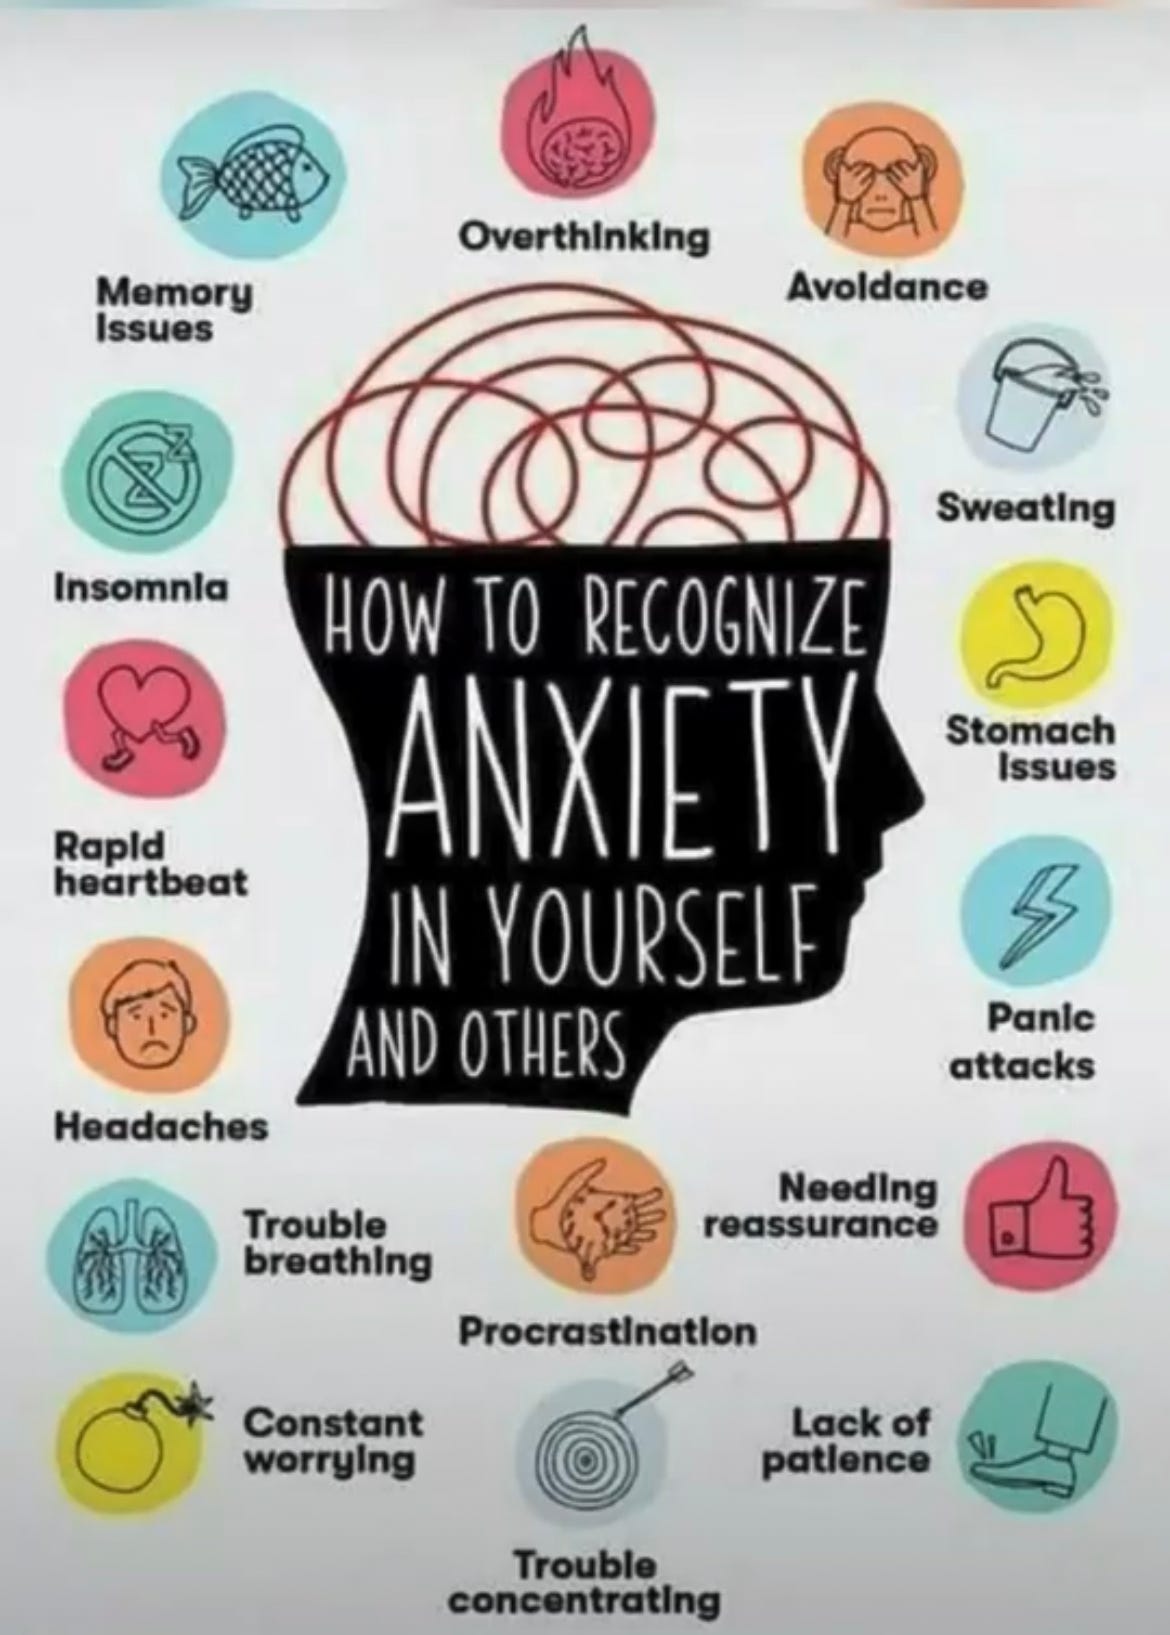 Recognizing anxiety